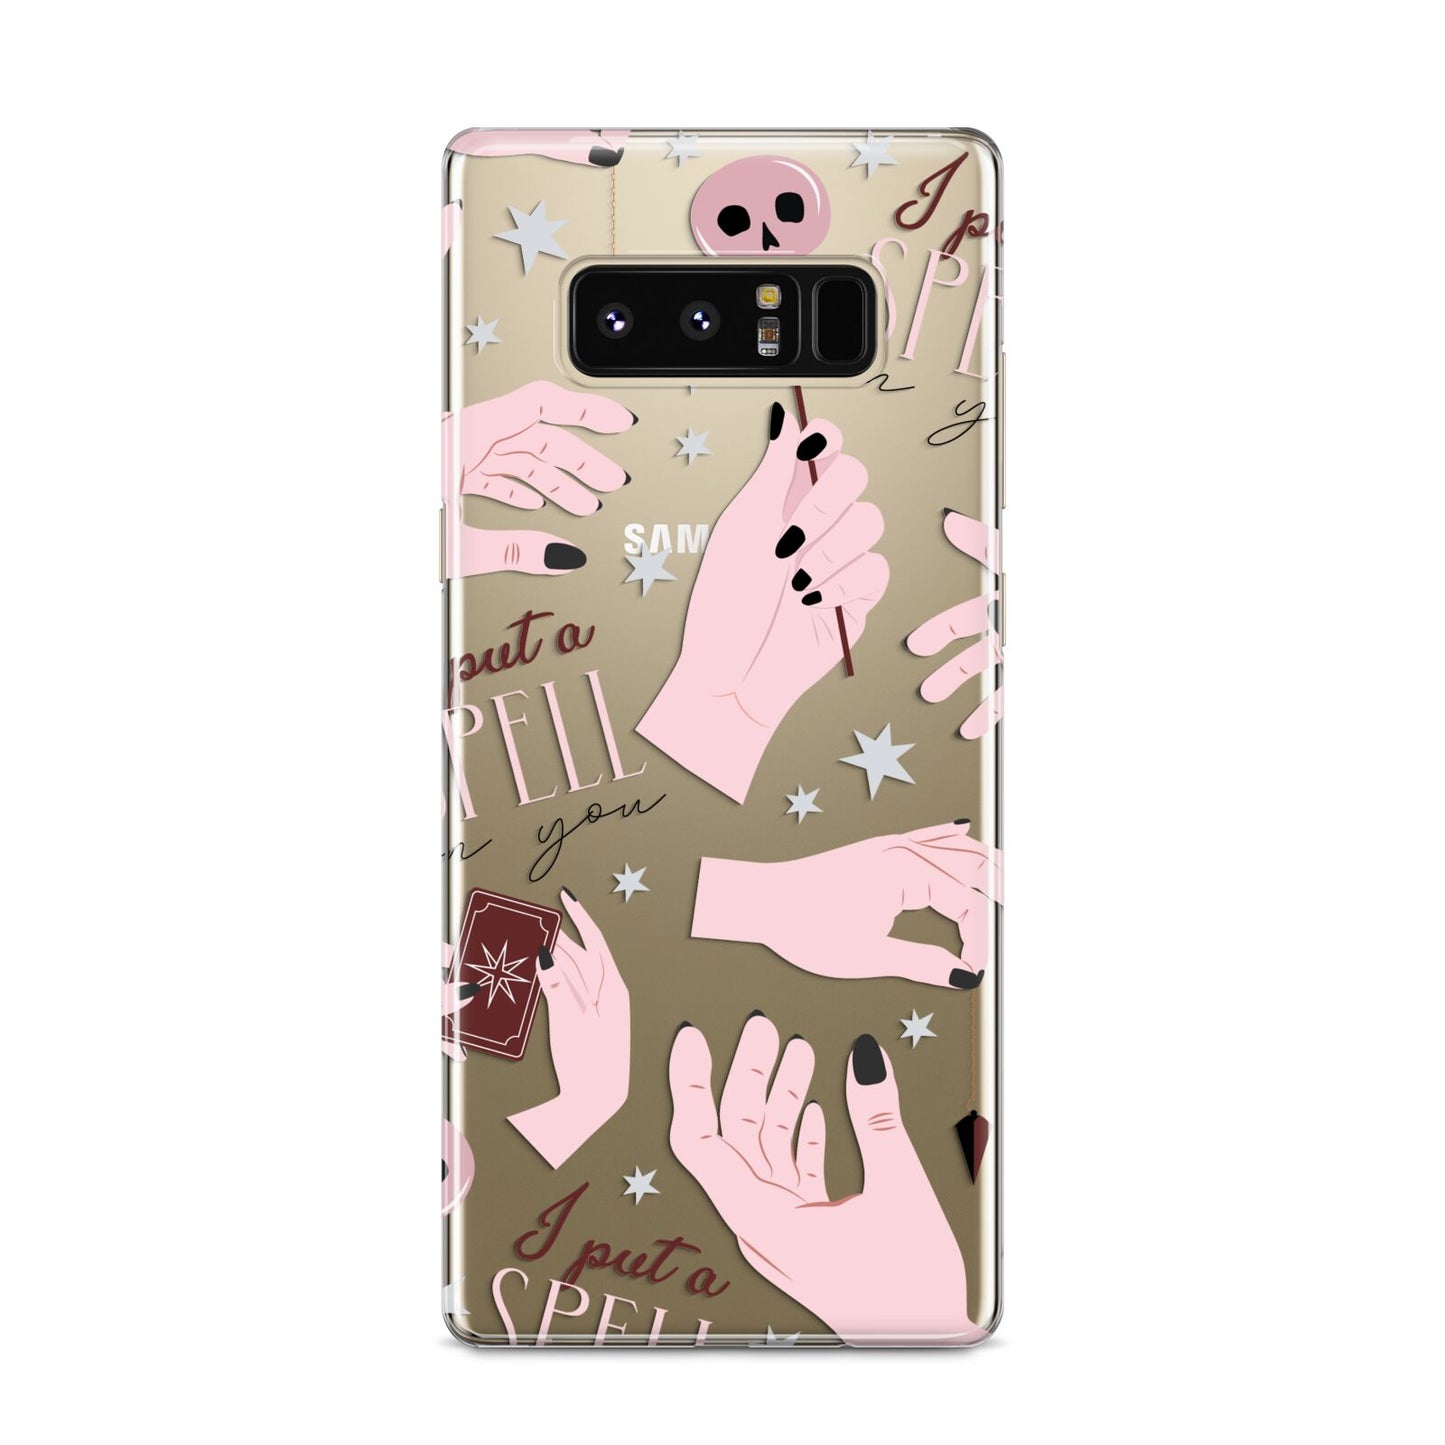 Witches Hands and Tarot Cards Samsung Galaxy S8 Case